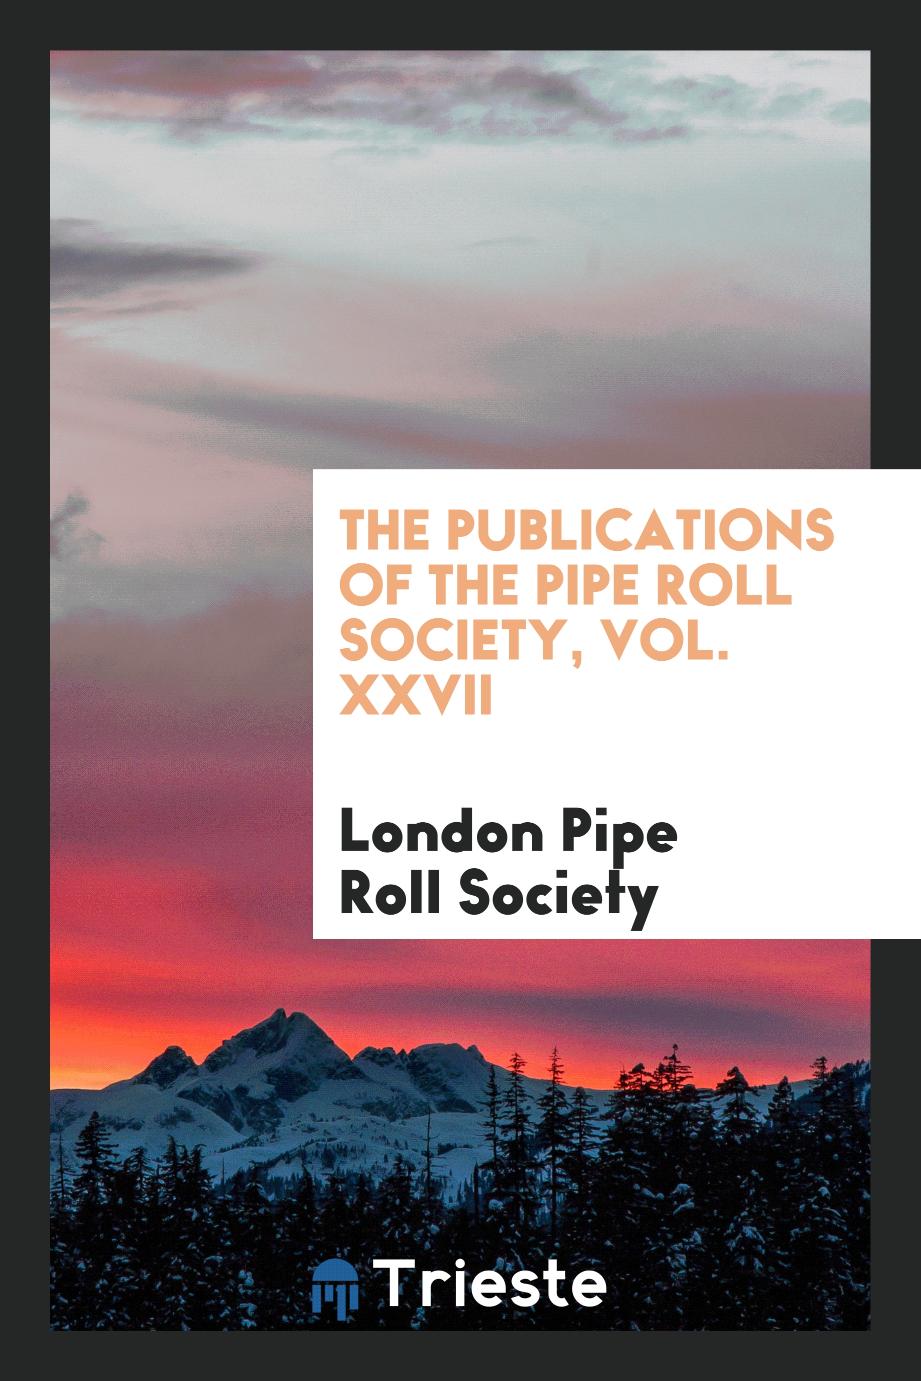 The Publications of the Pipe Roll Society, Vol. XXVII